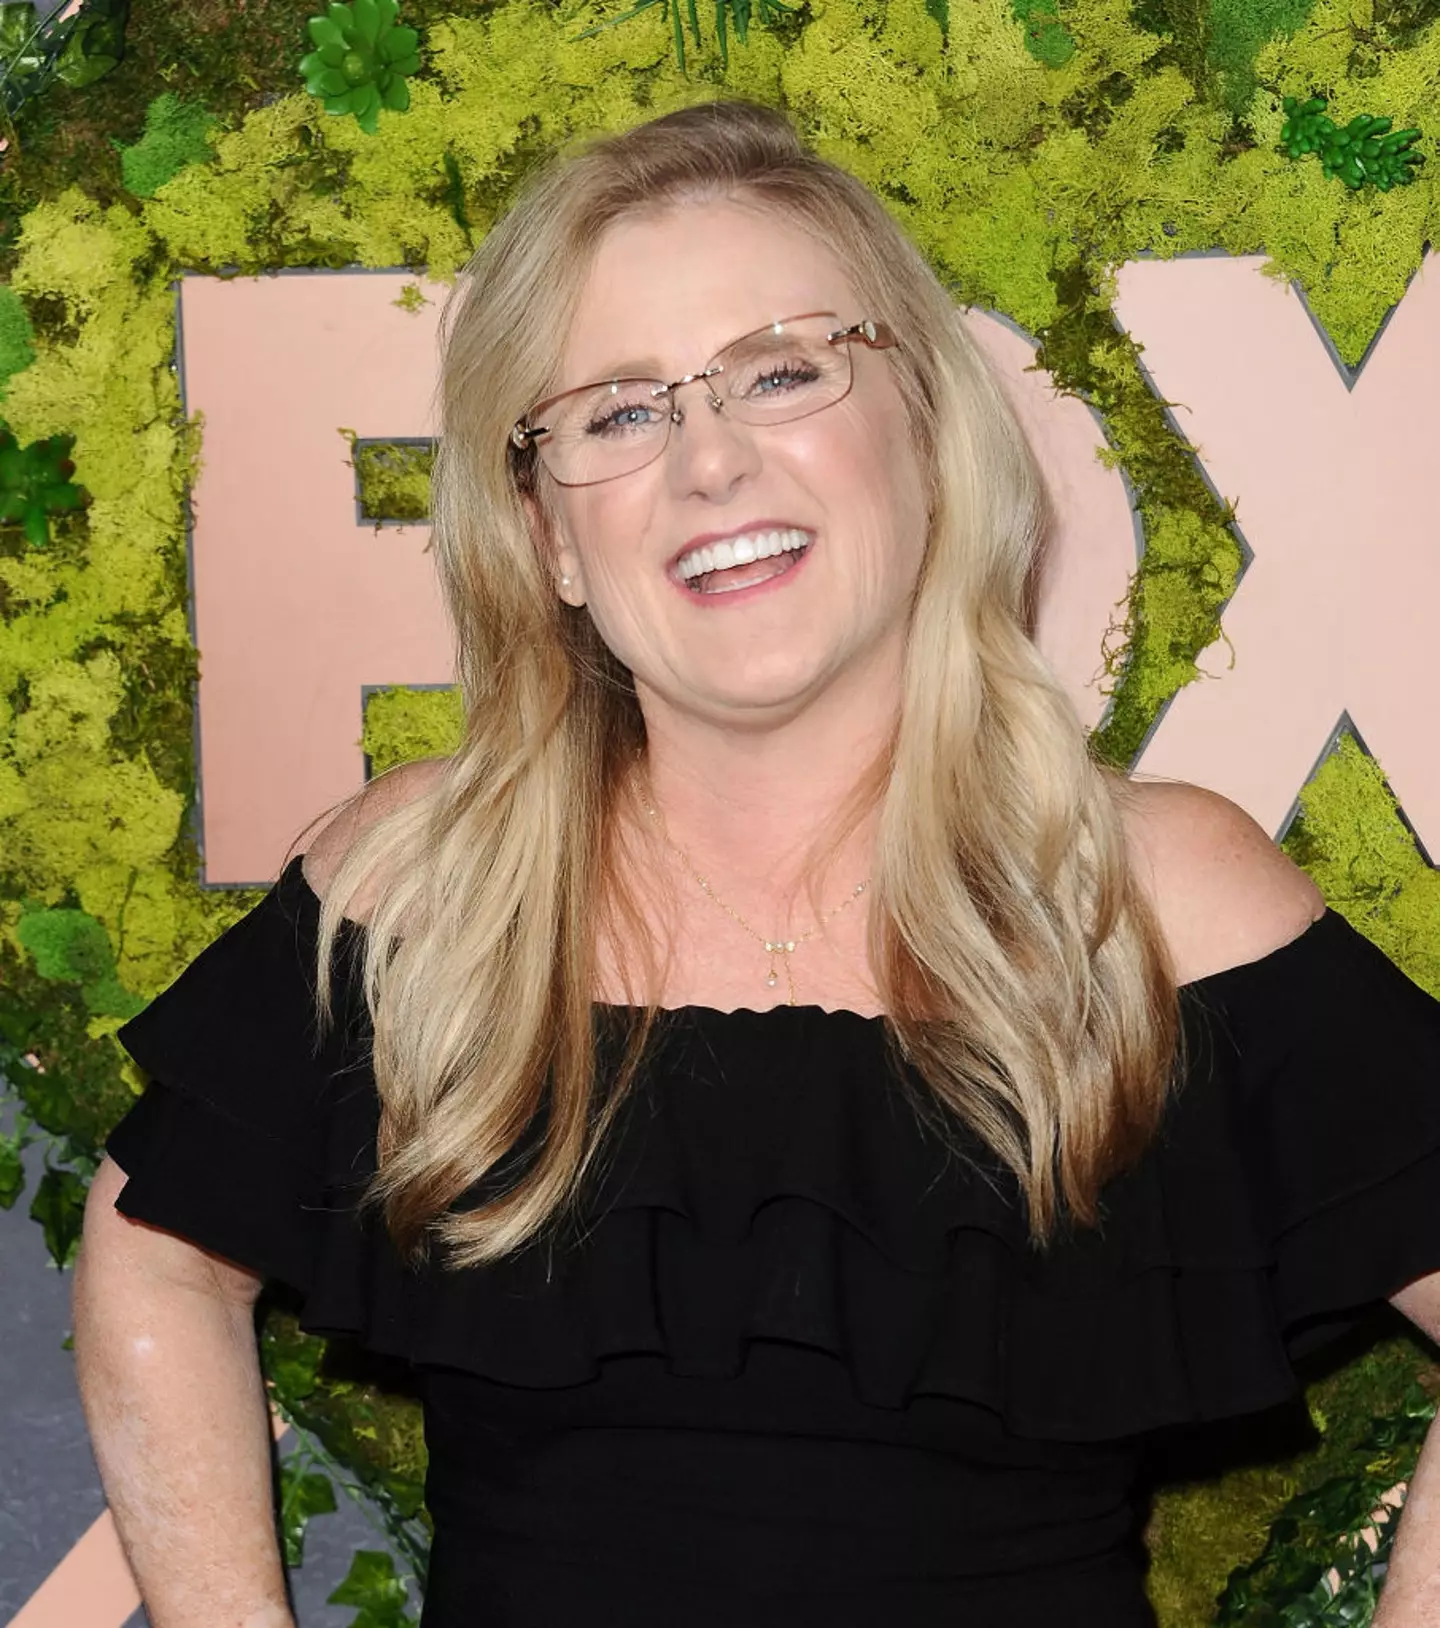 Sabrina's aunt is Nancy Cartwright AKA the voice behind Bart Simpson. (Jason LaVeris / Contributor / Getty Imagery)